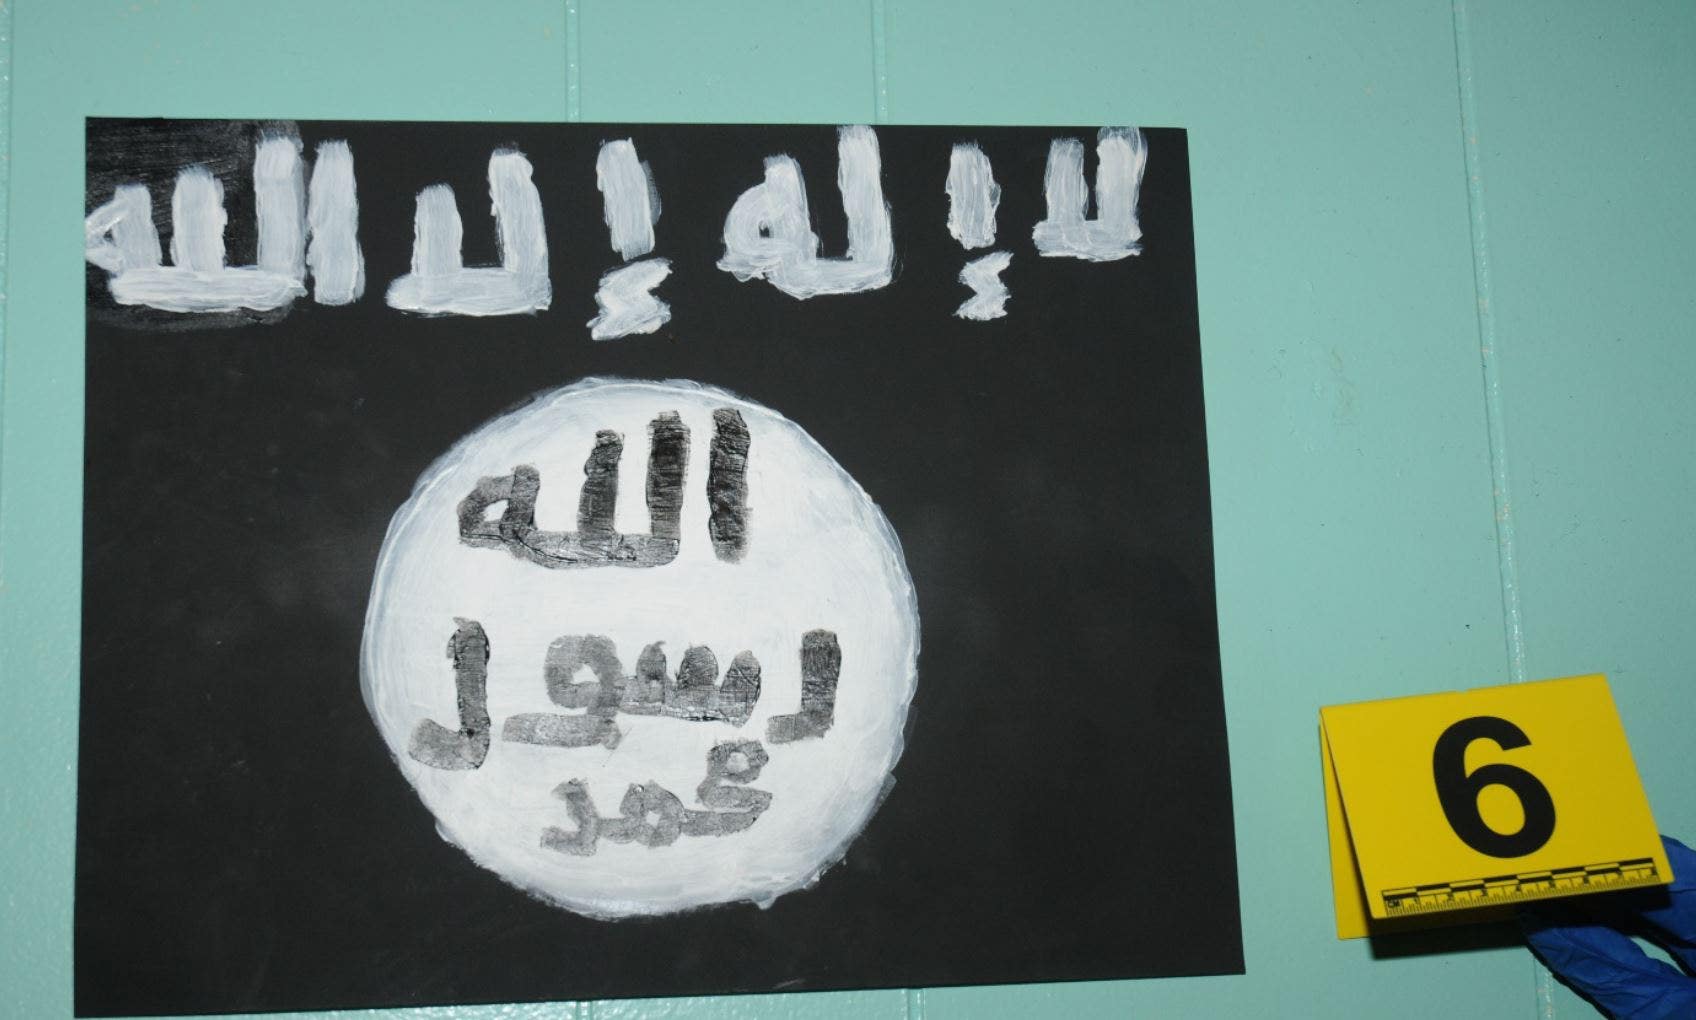 US teens planned ISIS-inspired attack on Chicago mosque, FBI says in newly released court docs